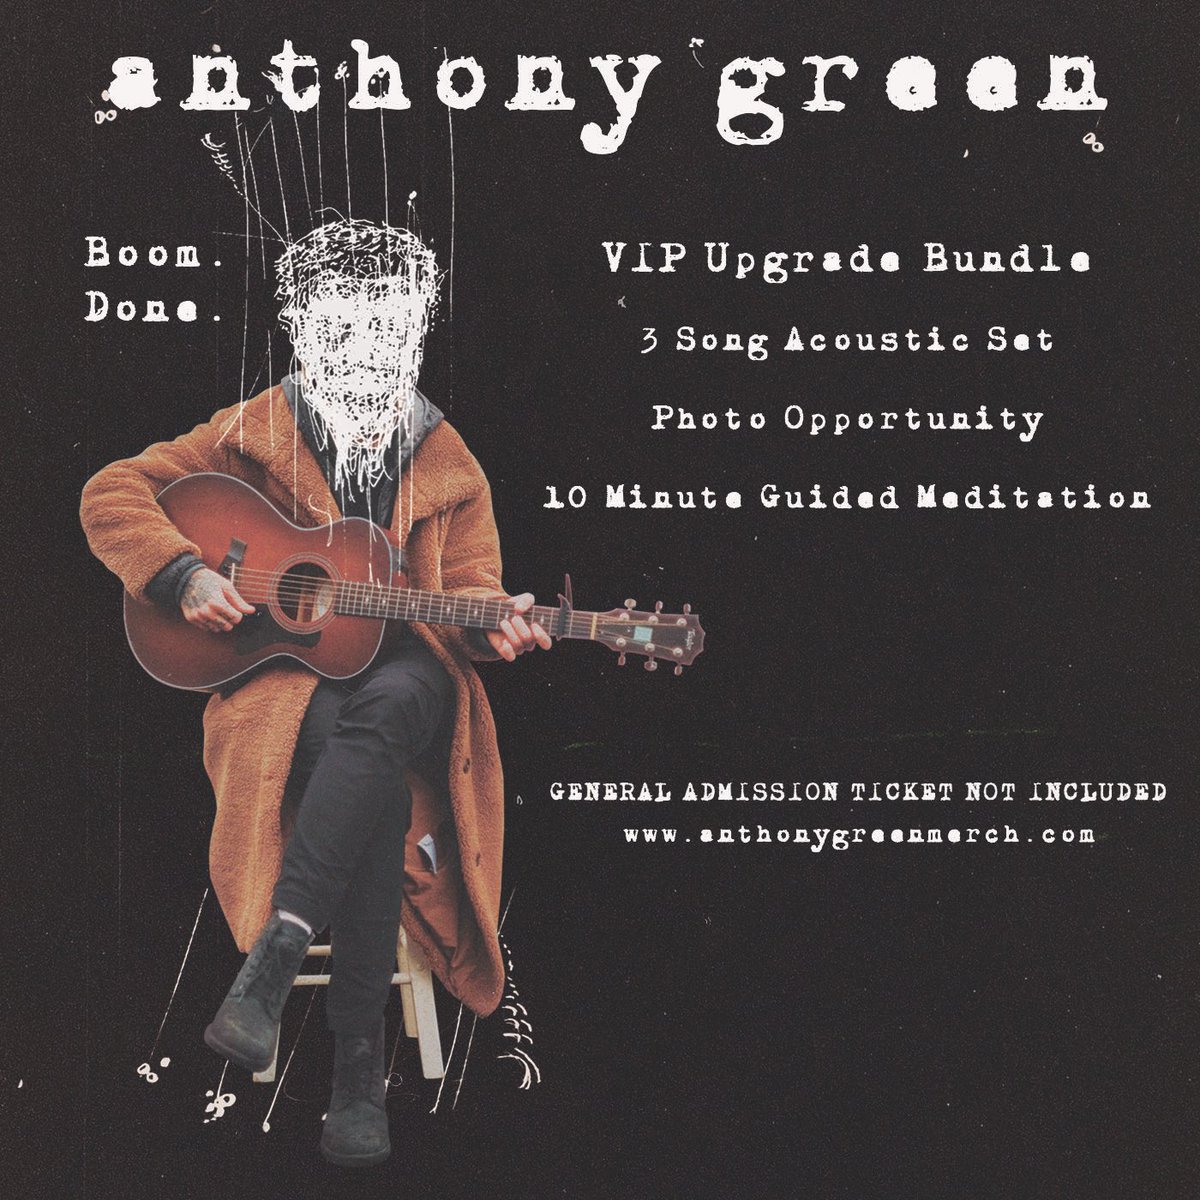 VIP Upgrades are now available at anthonygreenmerch.com/collections/bo… Please note, these do NOT include a ticket.